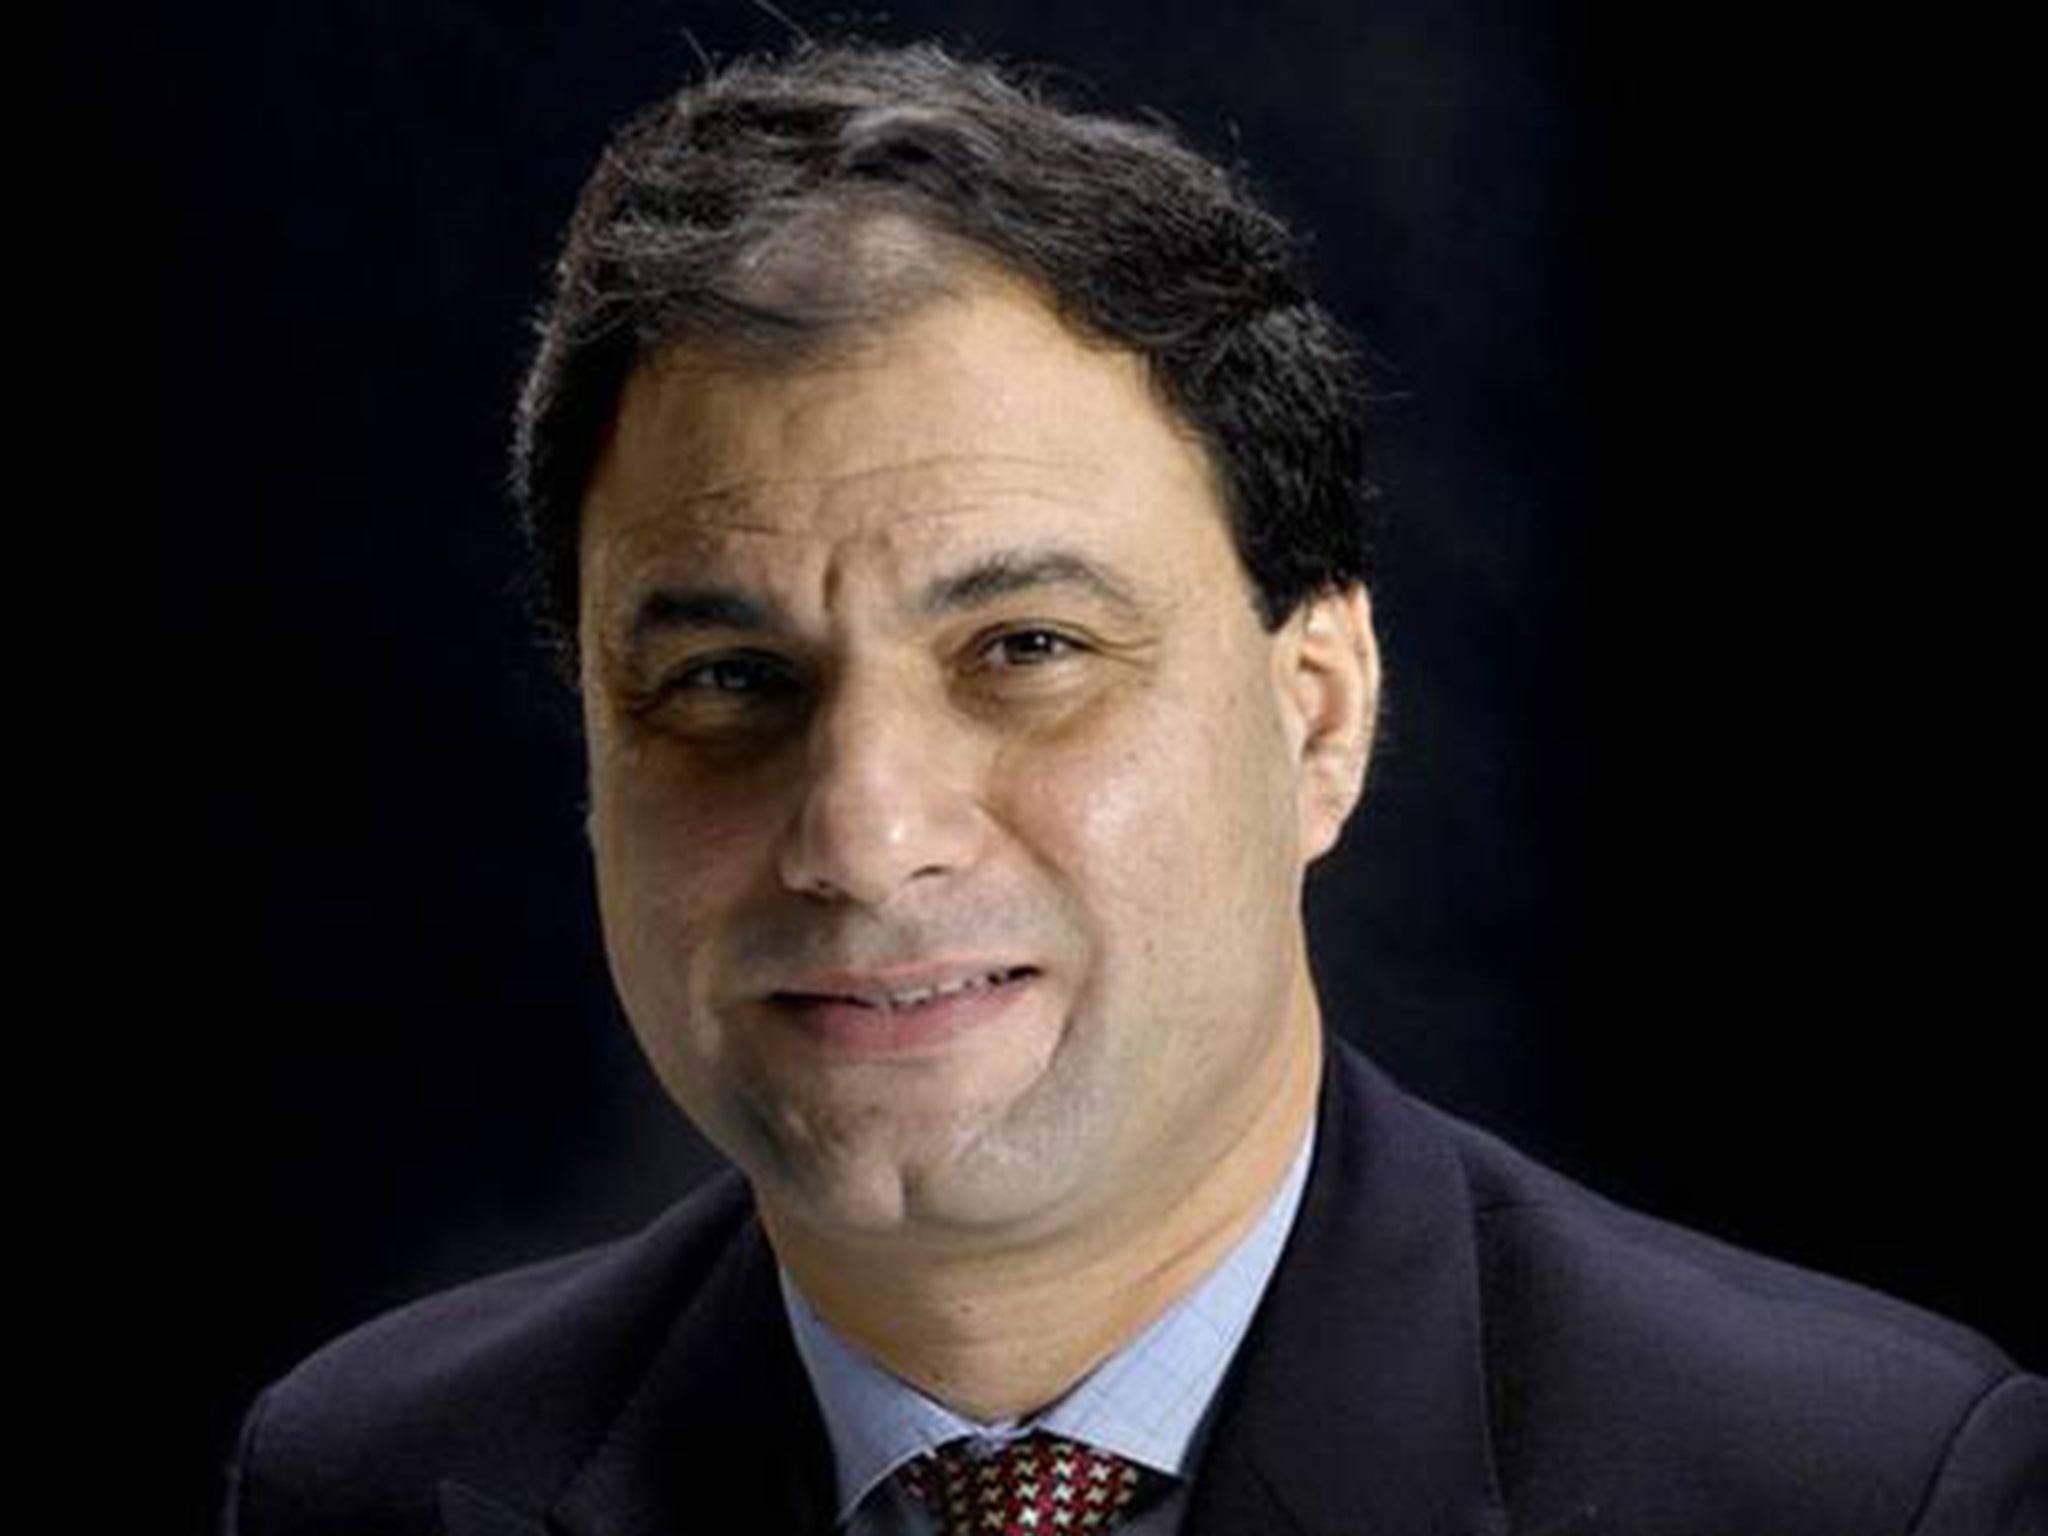 Cobra beer founder Lord Bilimoria is among thirty signatories to the letter